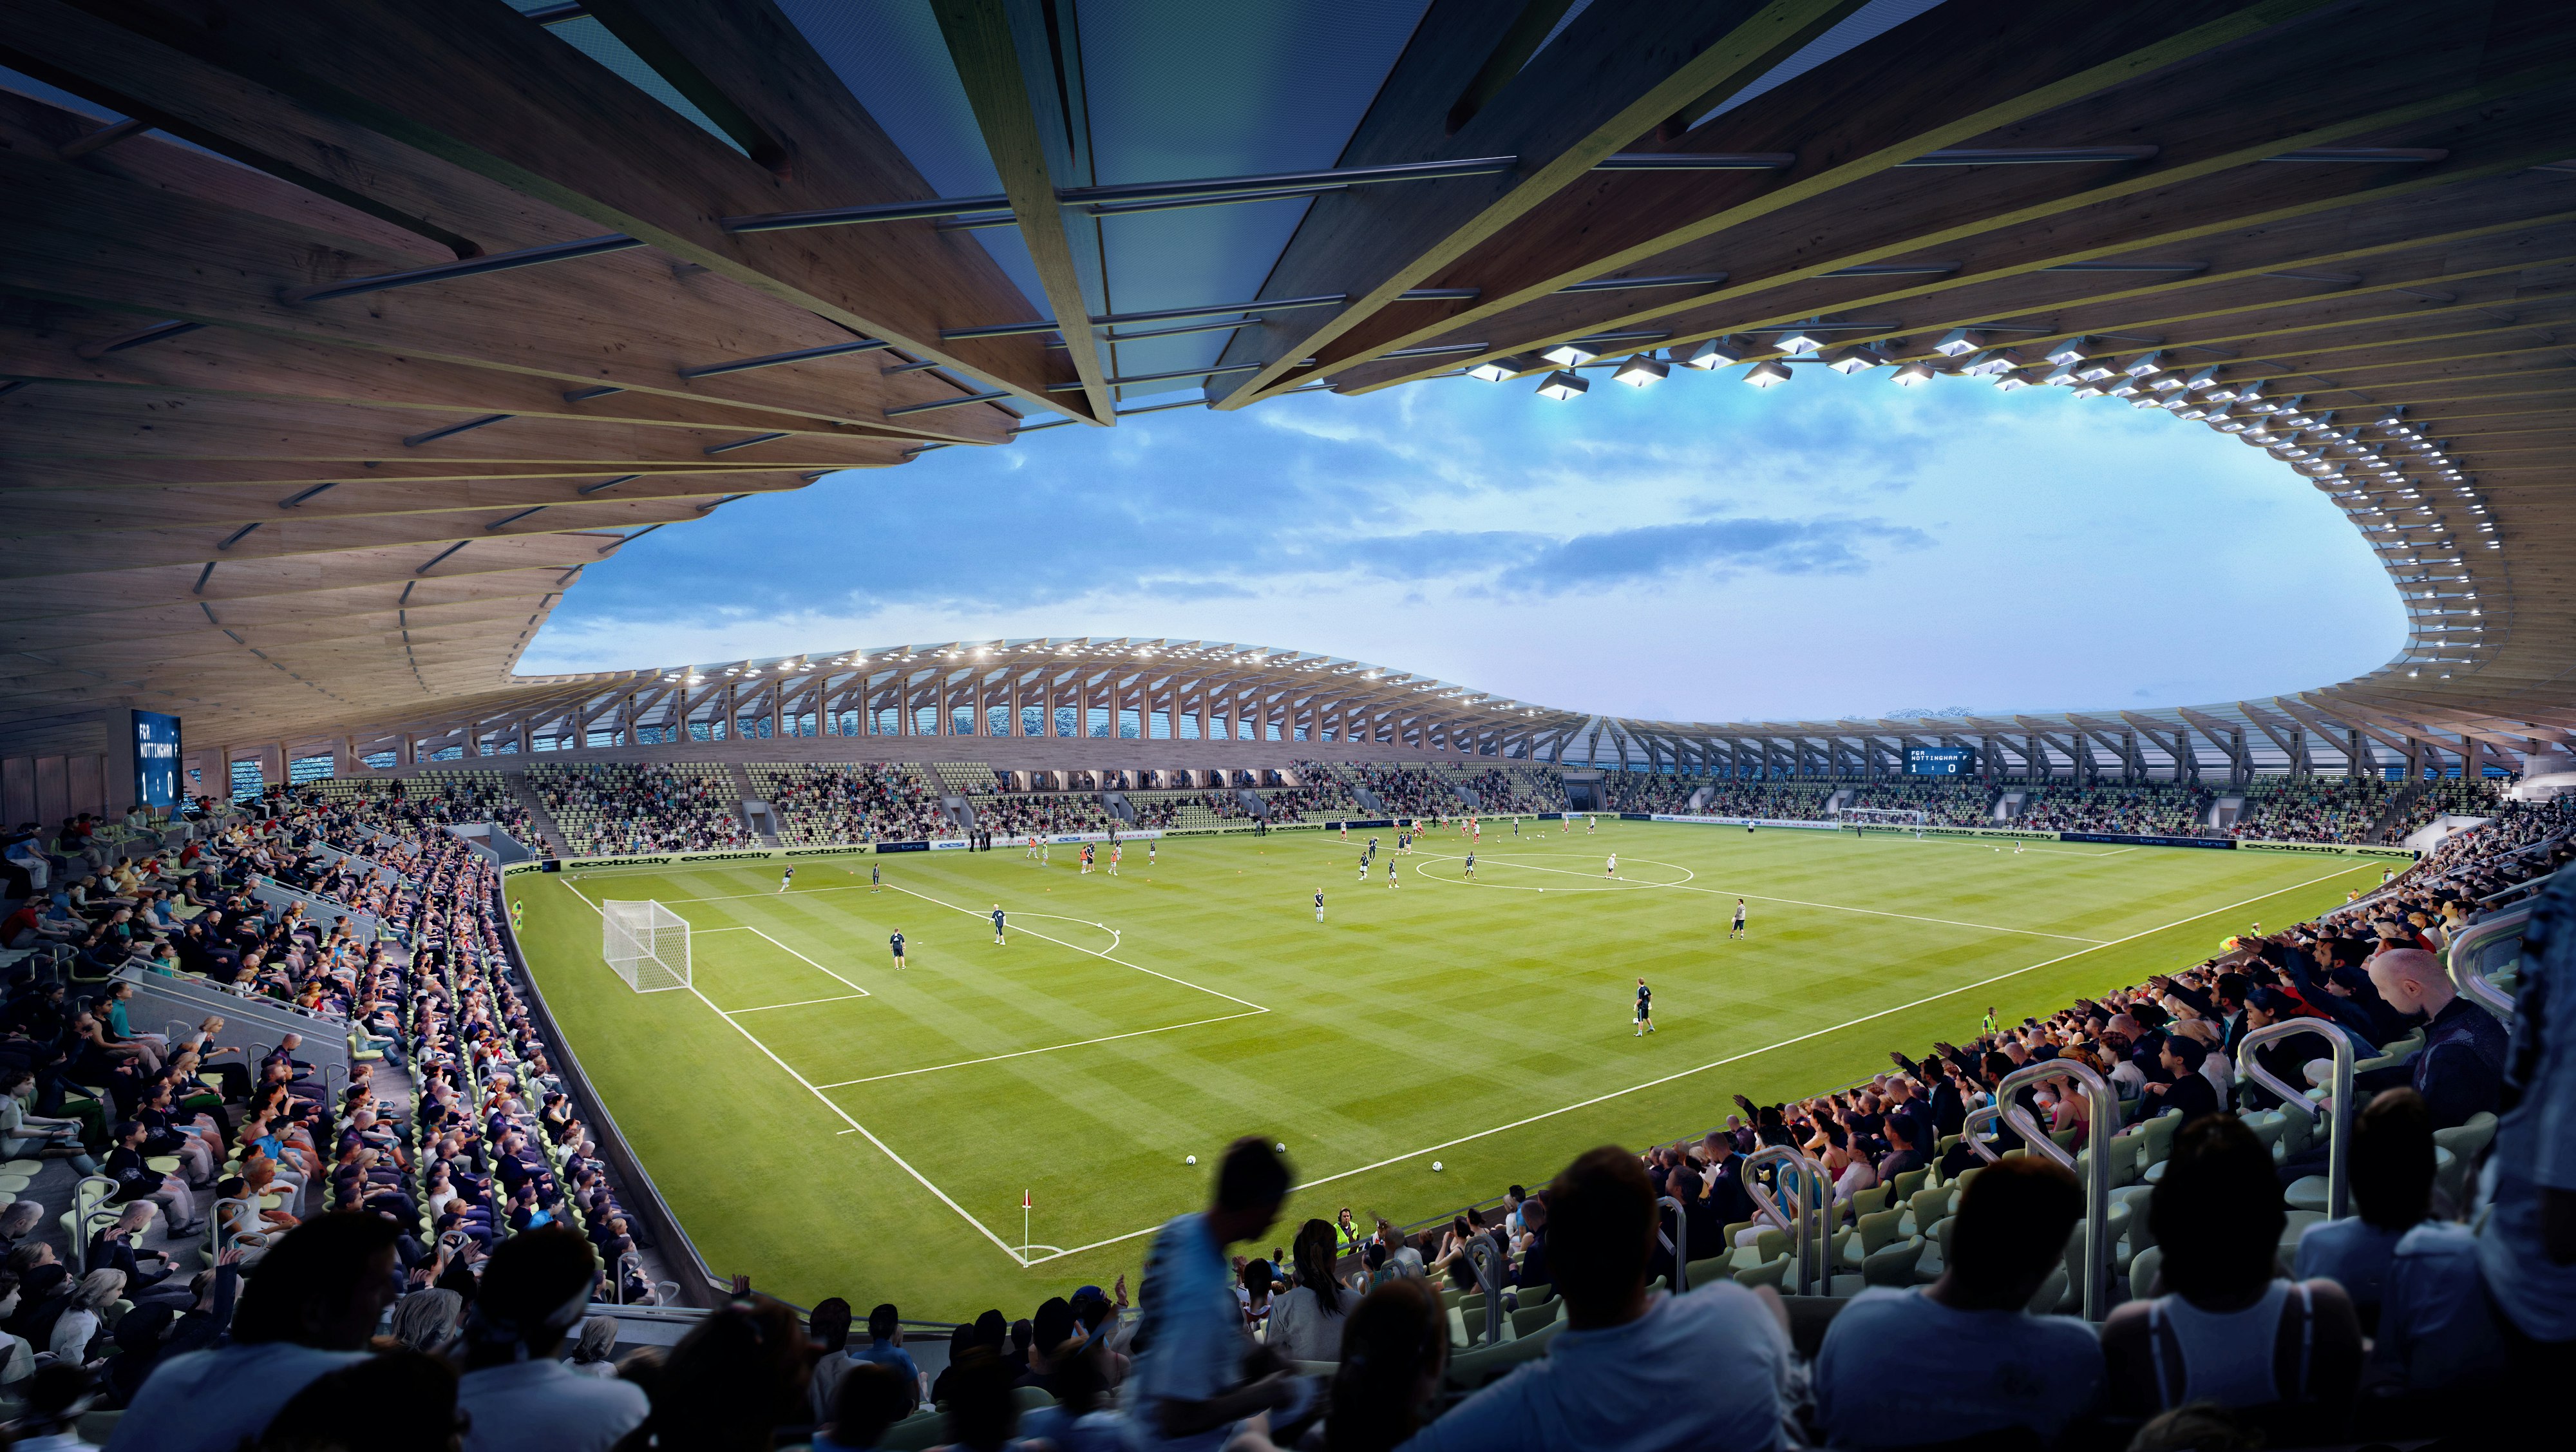 A rendering of the pitch of the stadium